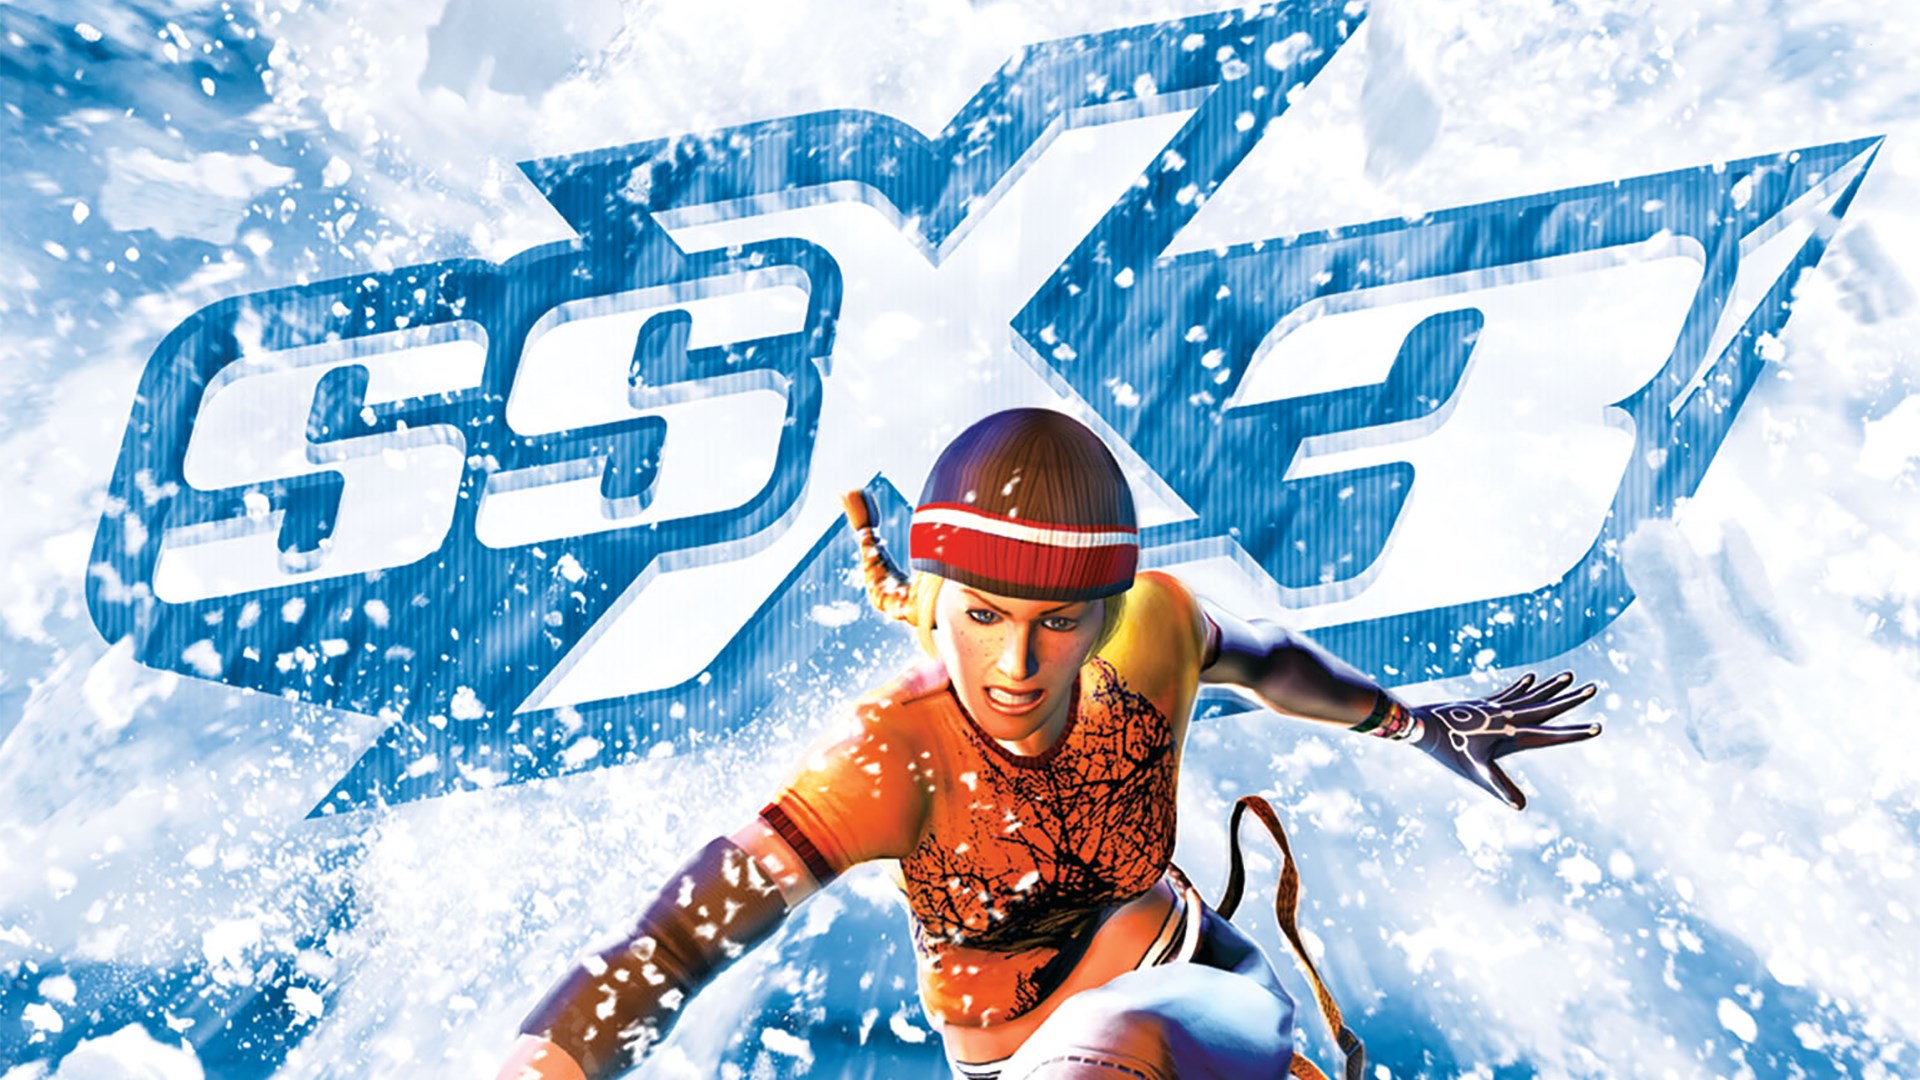 ssx on tour xbox one backwards compatibility